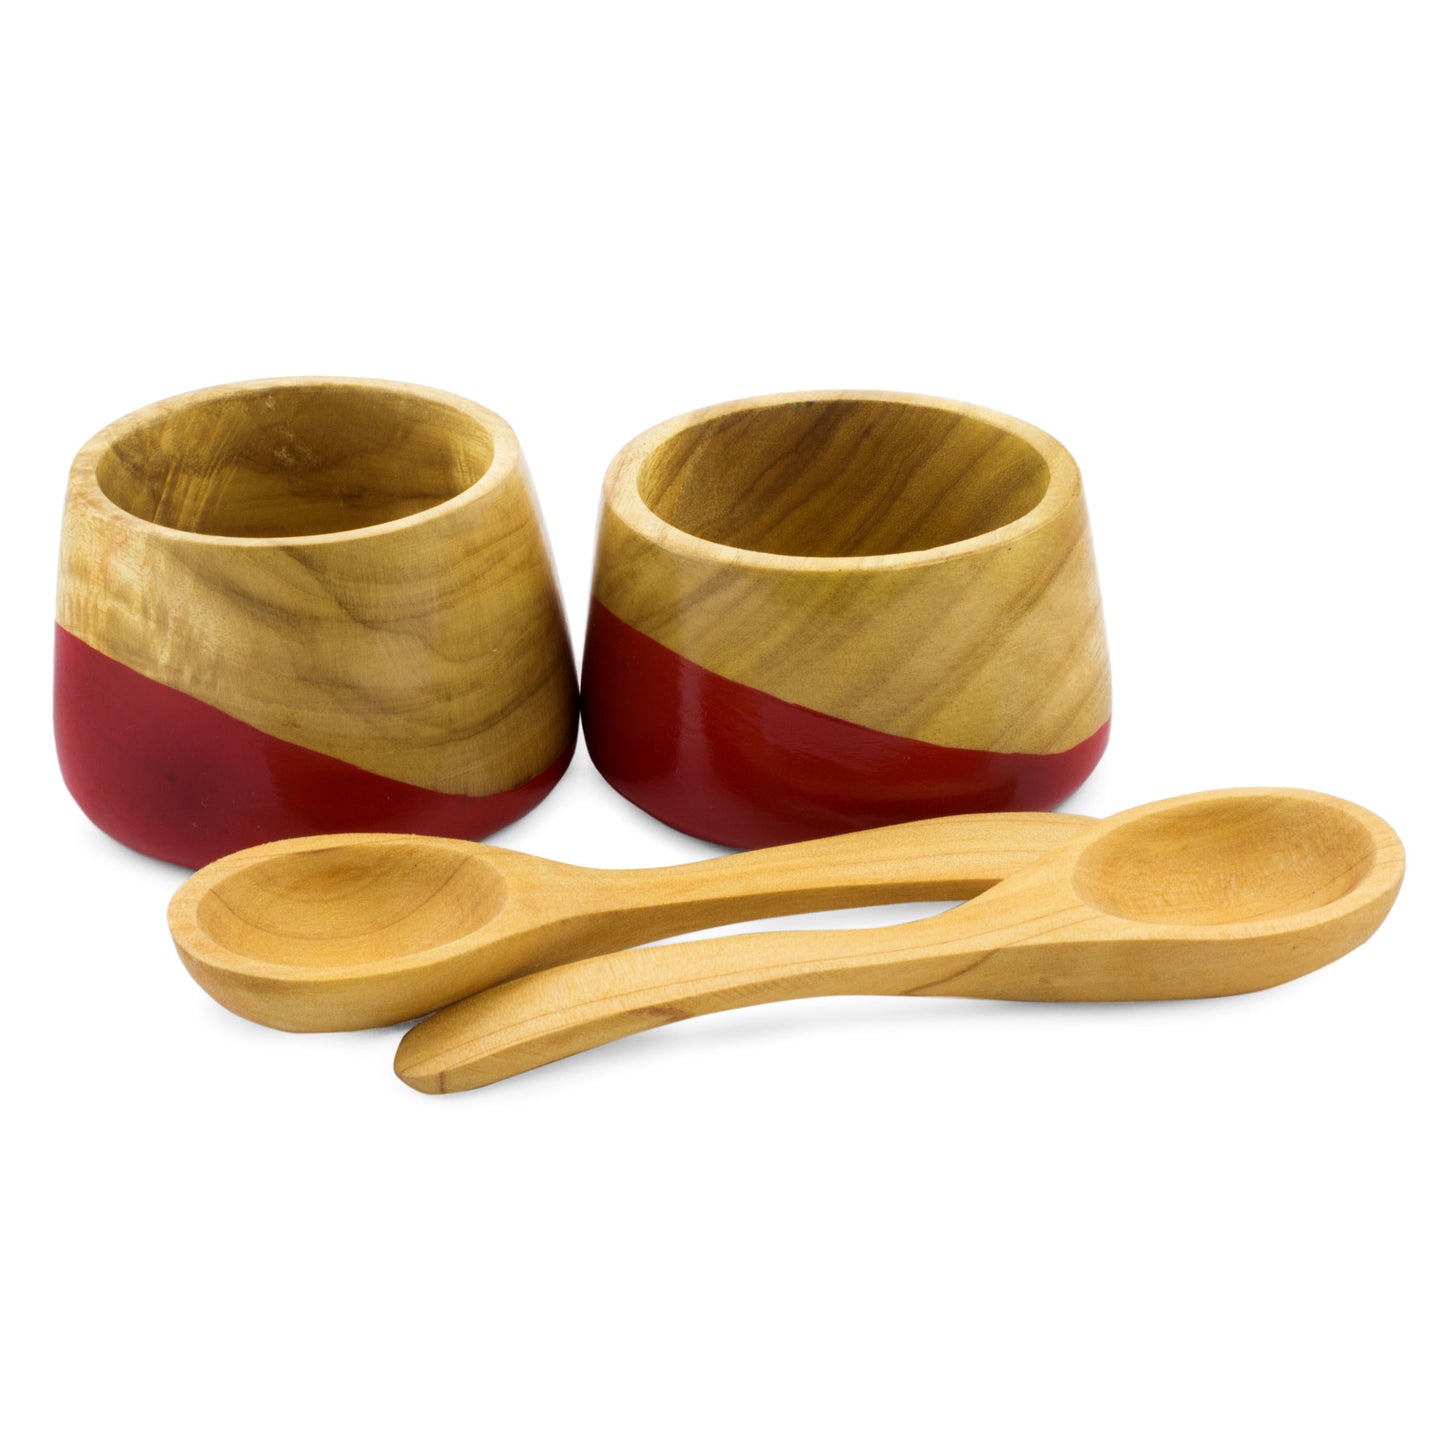 Spicy Red Salsa Bowls and Spoons Hand Crafted (pair)